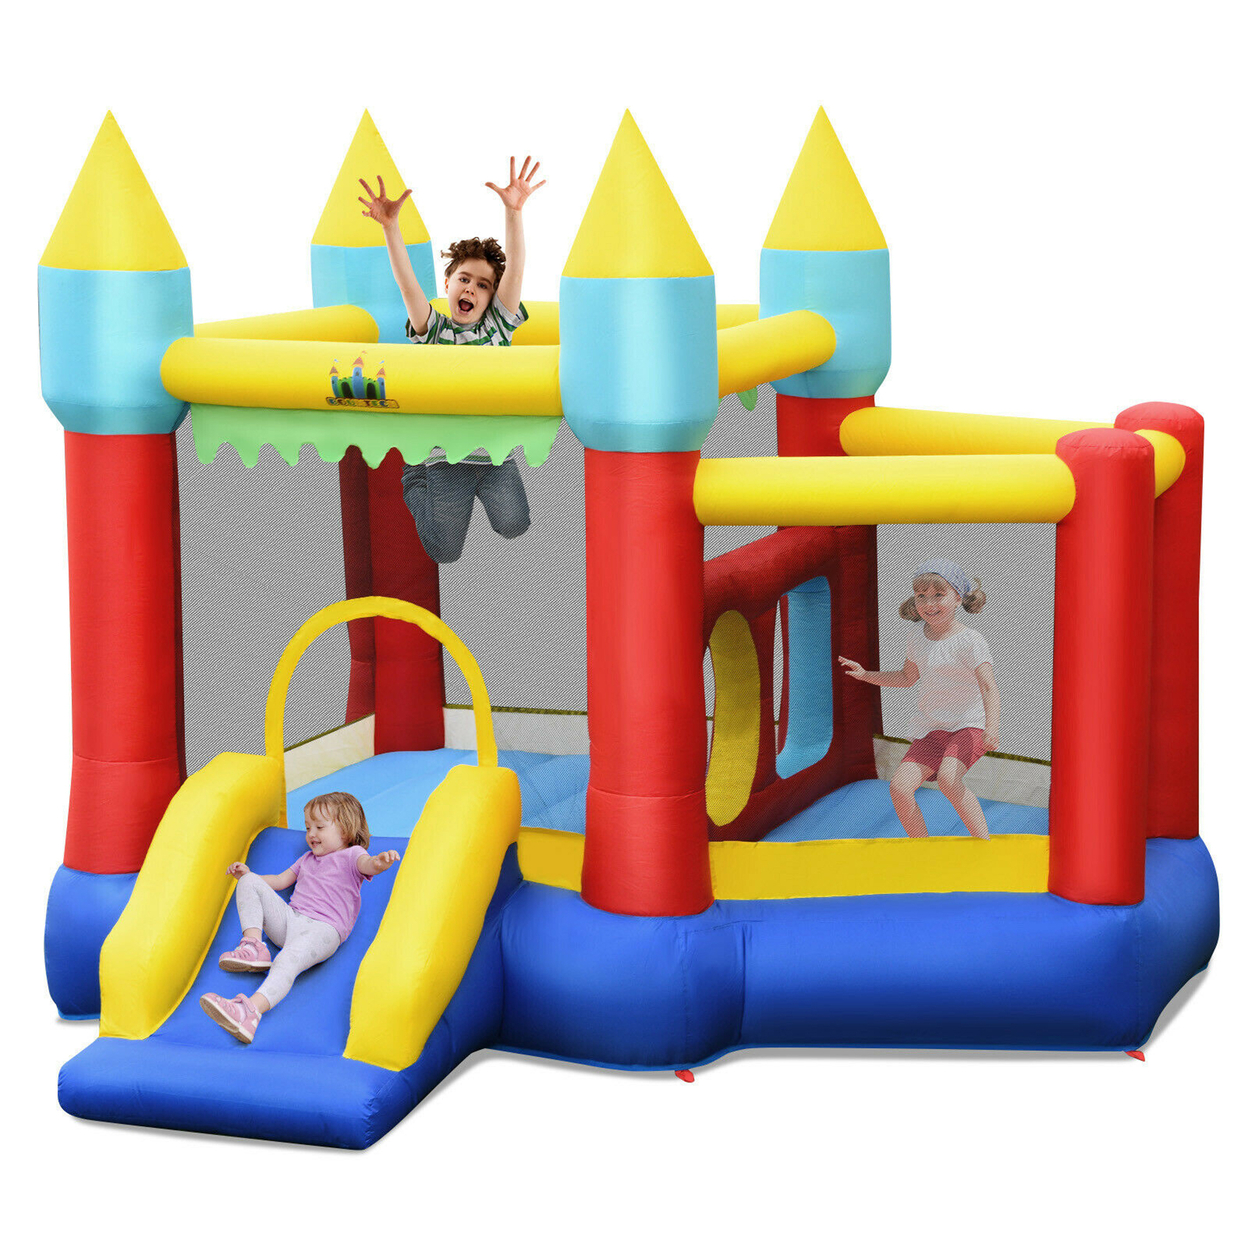 Inflatable Bounce House Slide Jumping Castle Ball Pit Tunnels Without Blower